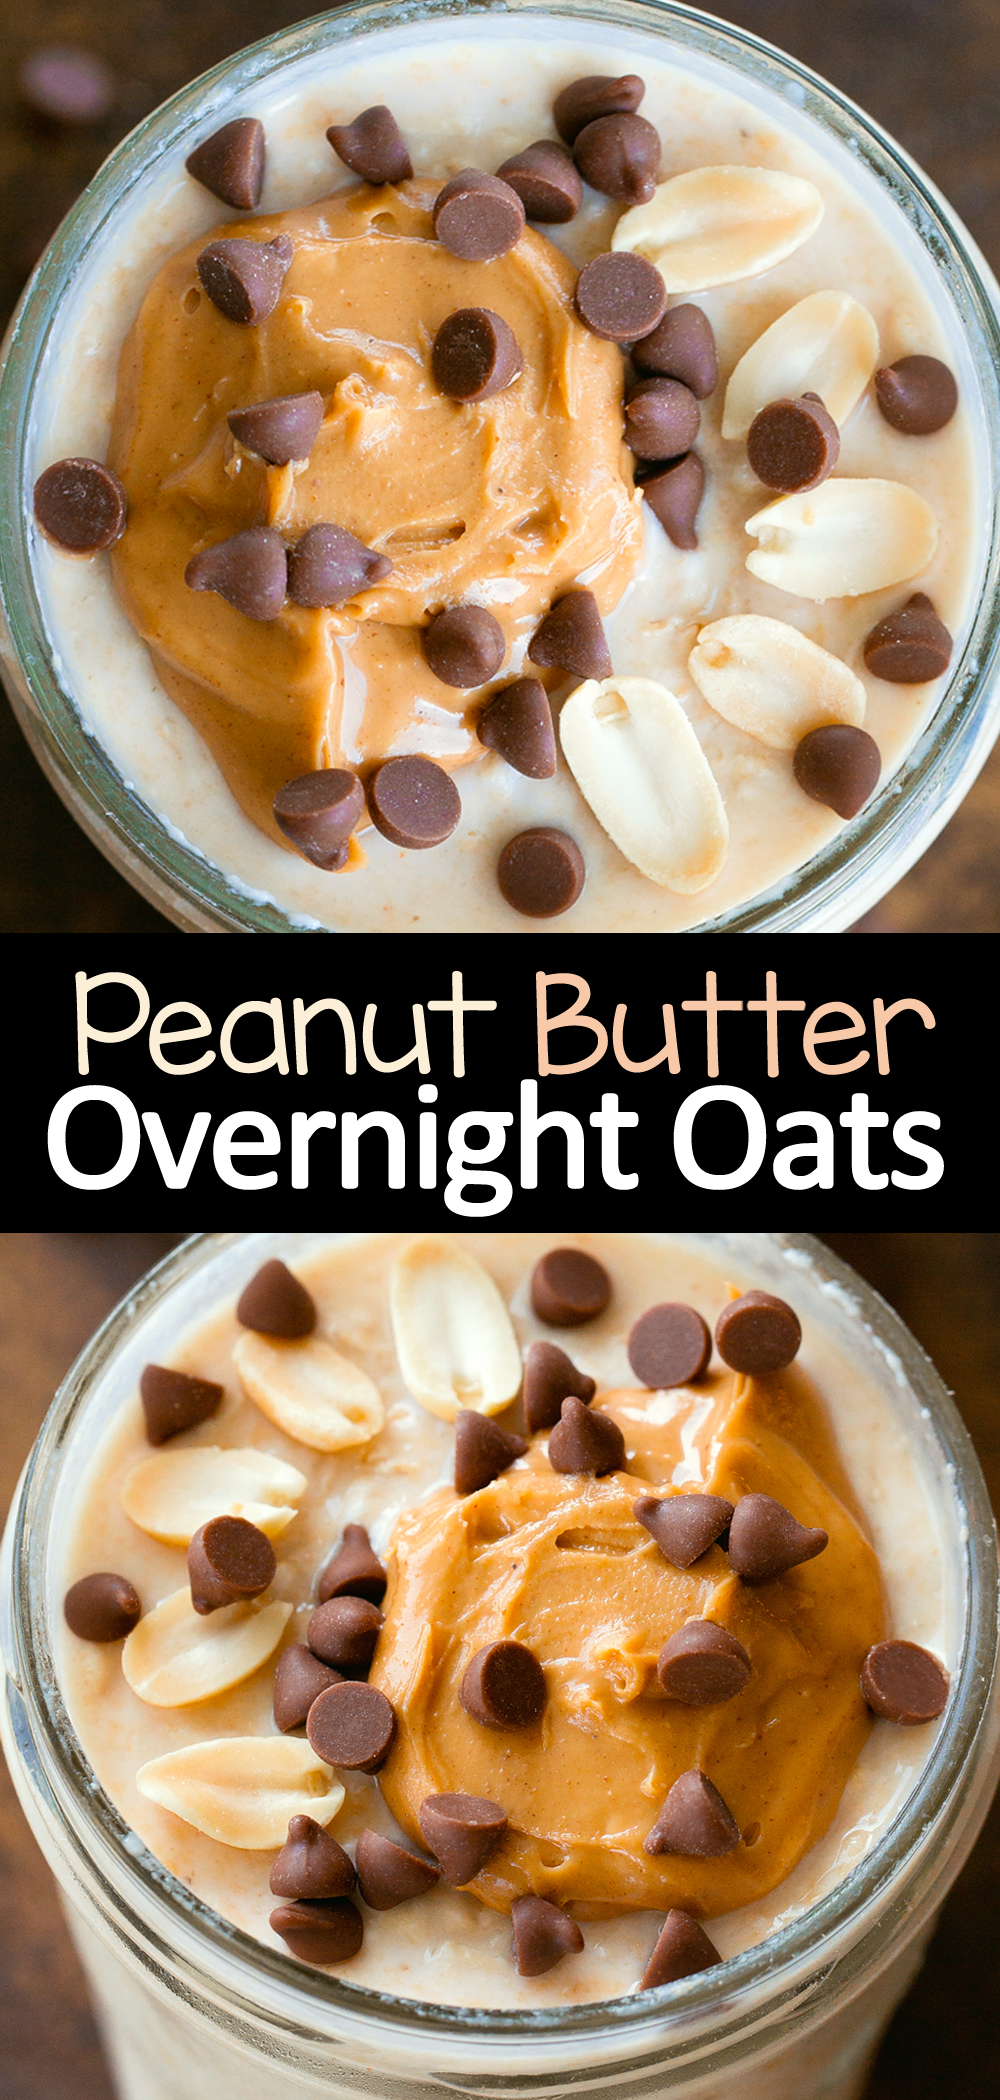 https://chocolatecoveredkatie.com/wp-content/uploads/2011/03/How-To-Make-Single-Serving-Peanut-Butter-Overnight-Oats.png